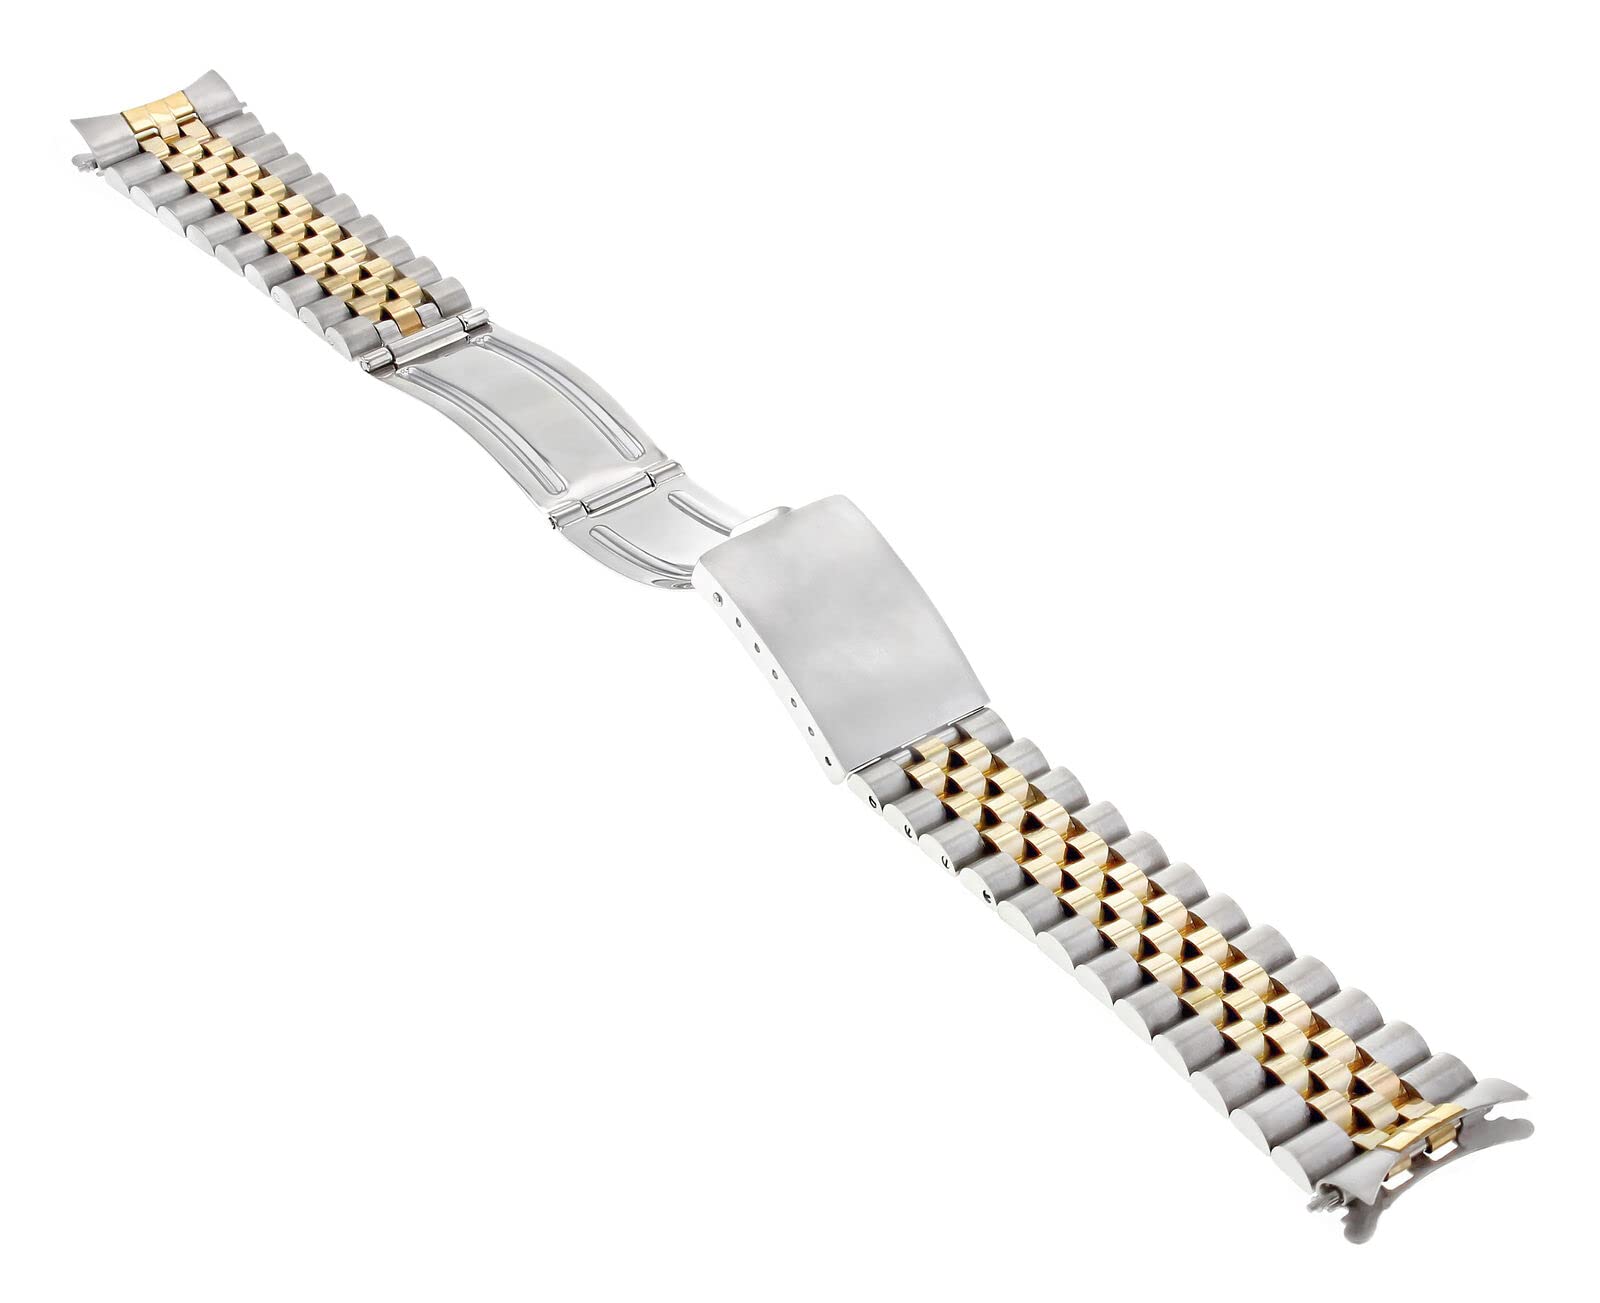 Ewatchparts 19MM 14K GOLD JUBILEE WATCH BAND COMPATIBLE WITH 34MM ROLEX 15000 15010 15037 15038 15053